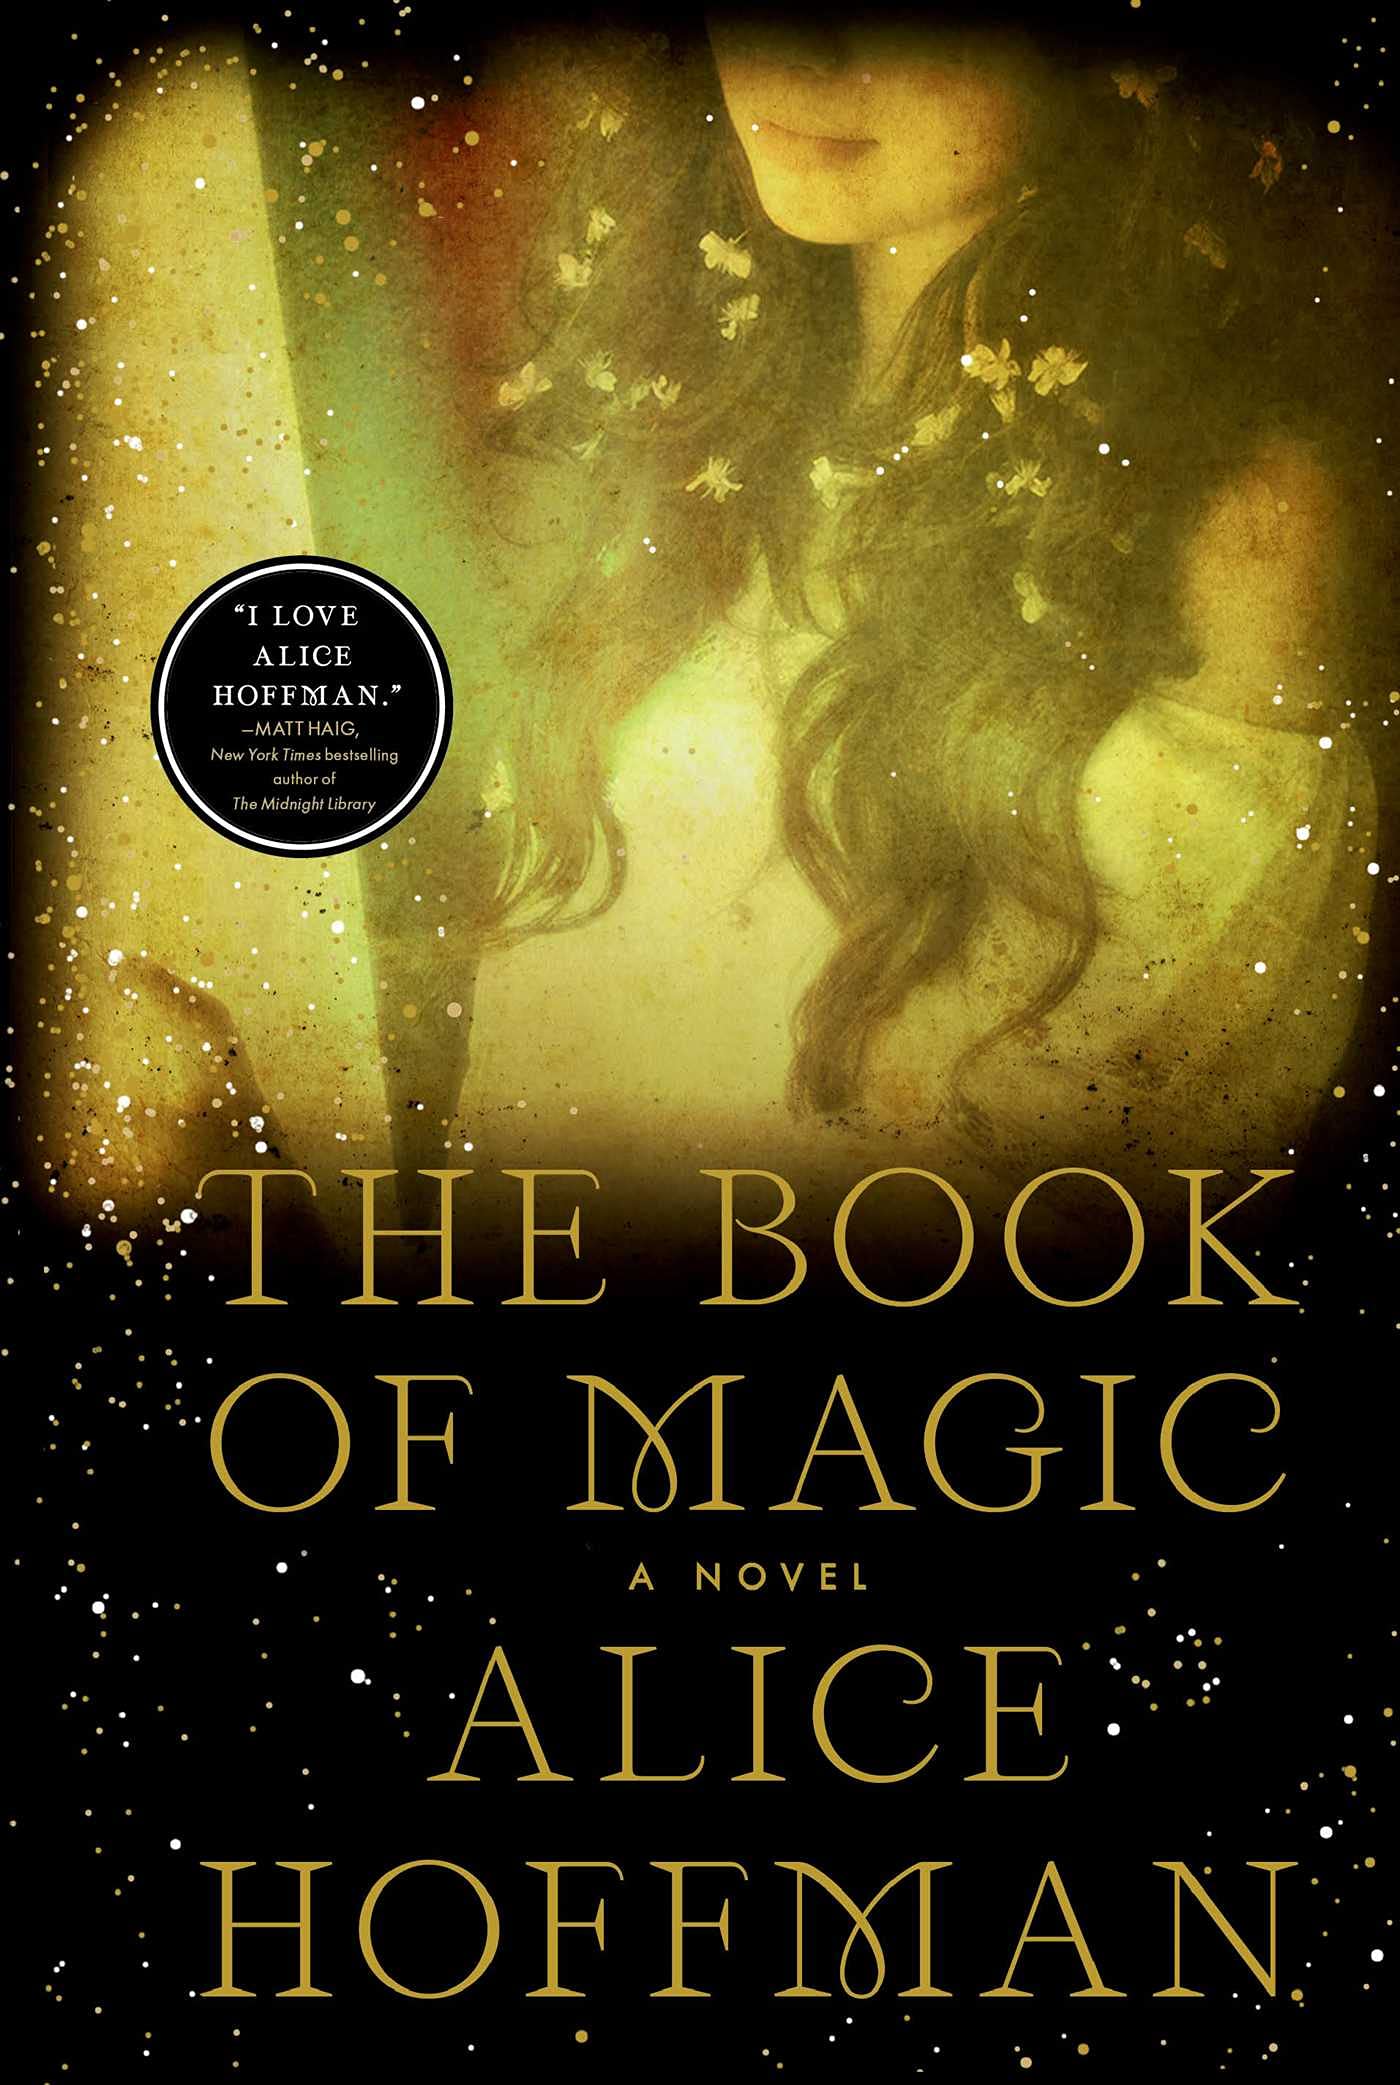 Image for "The Book of Magic"